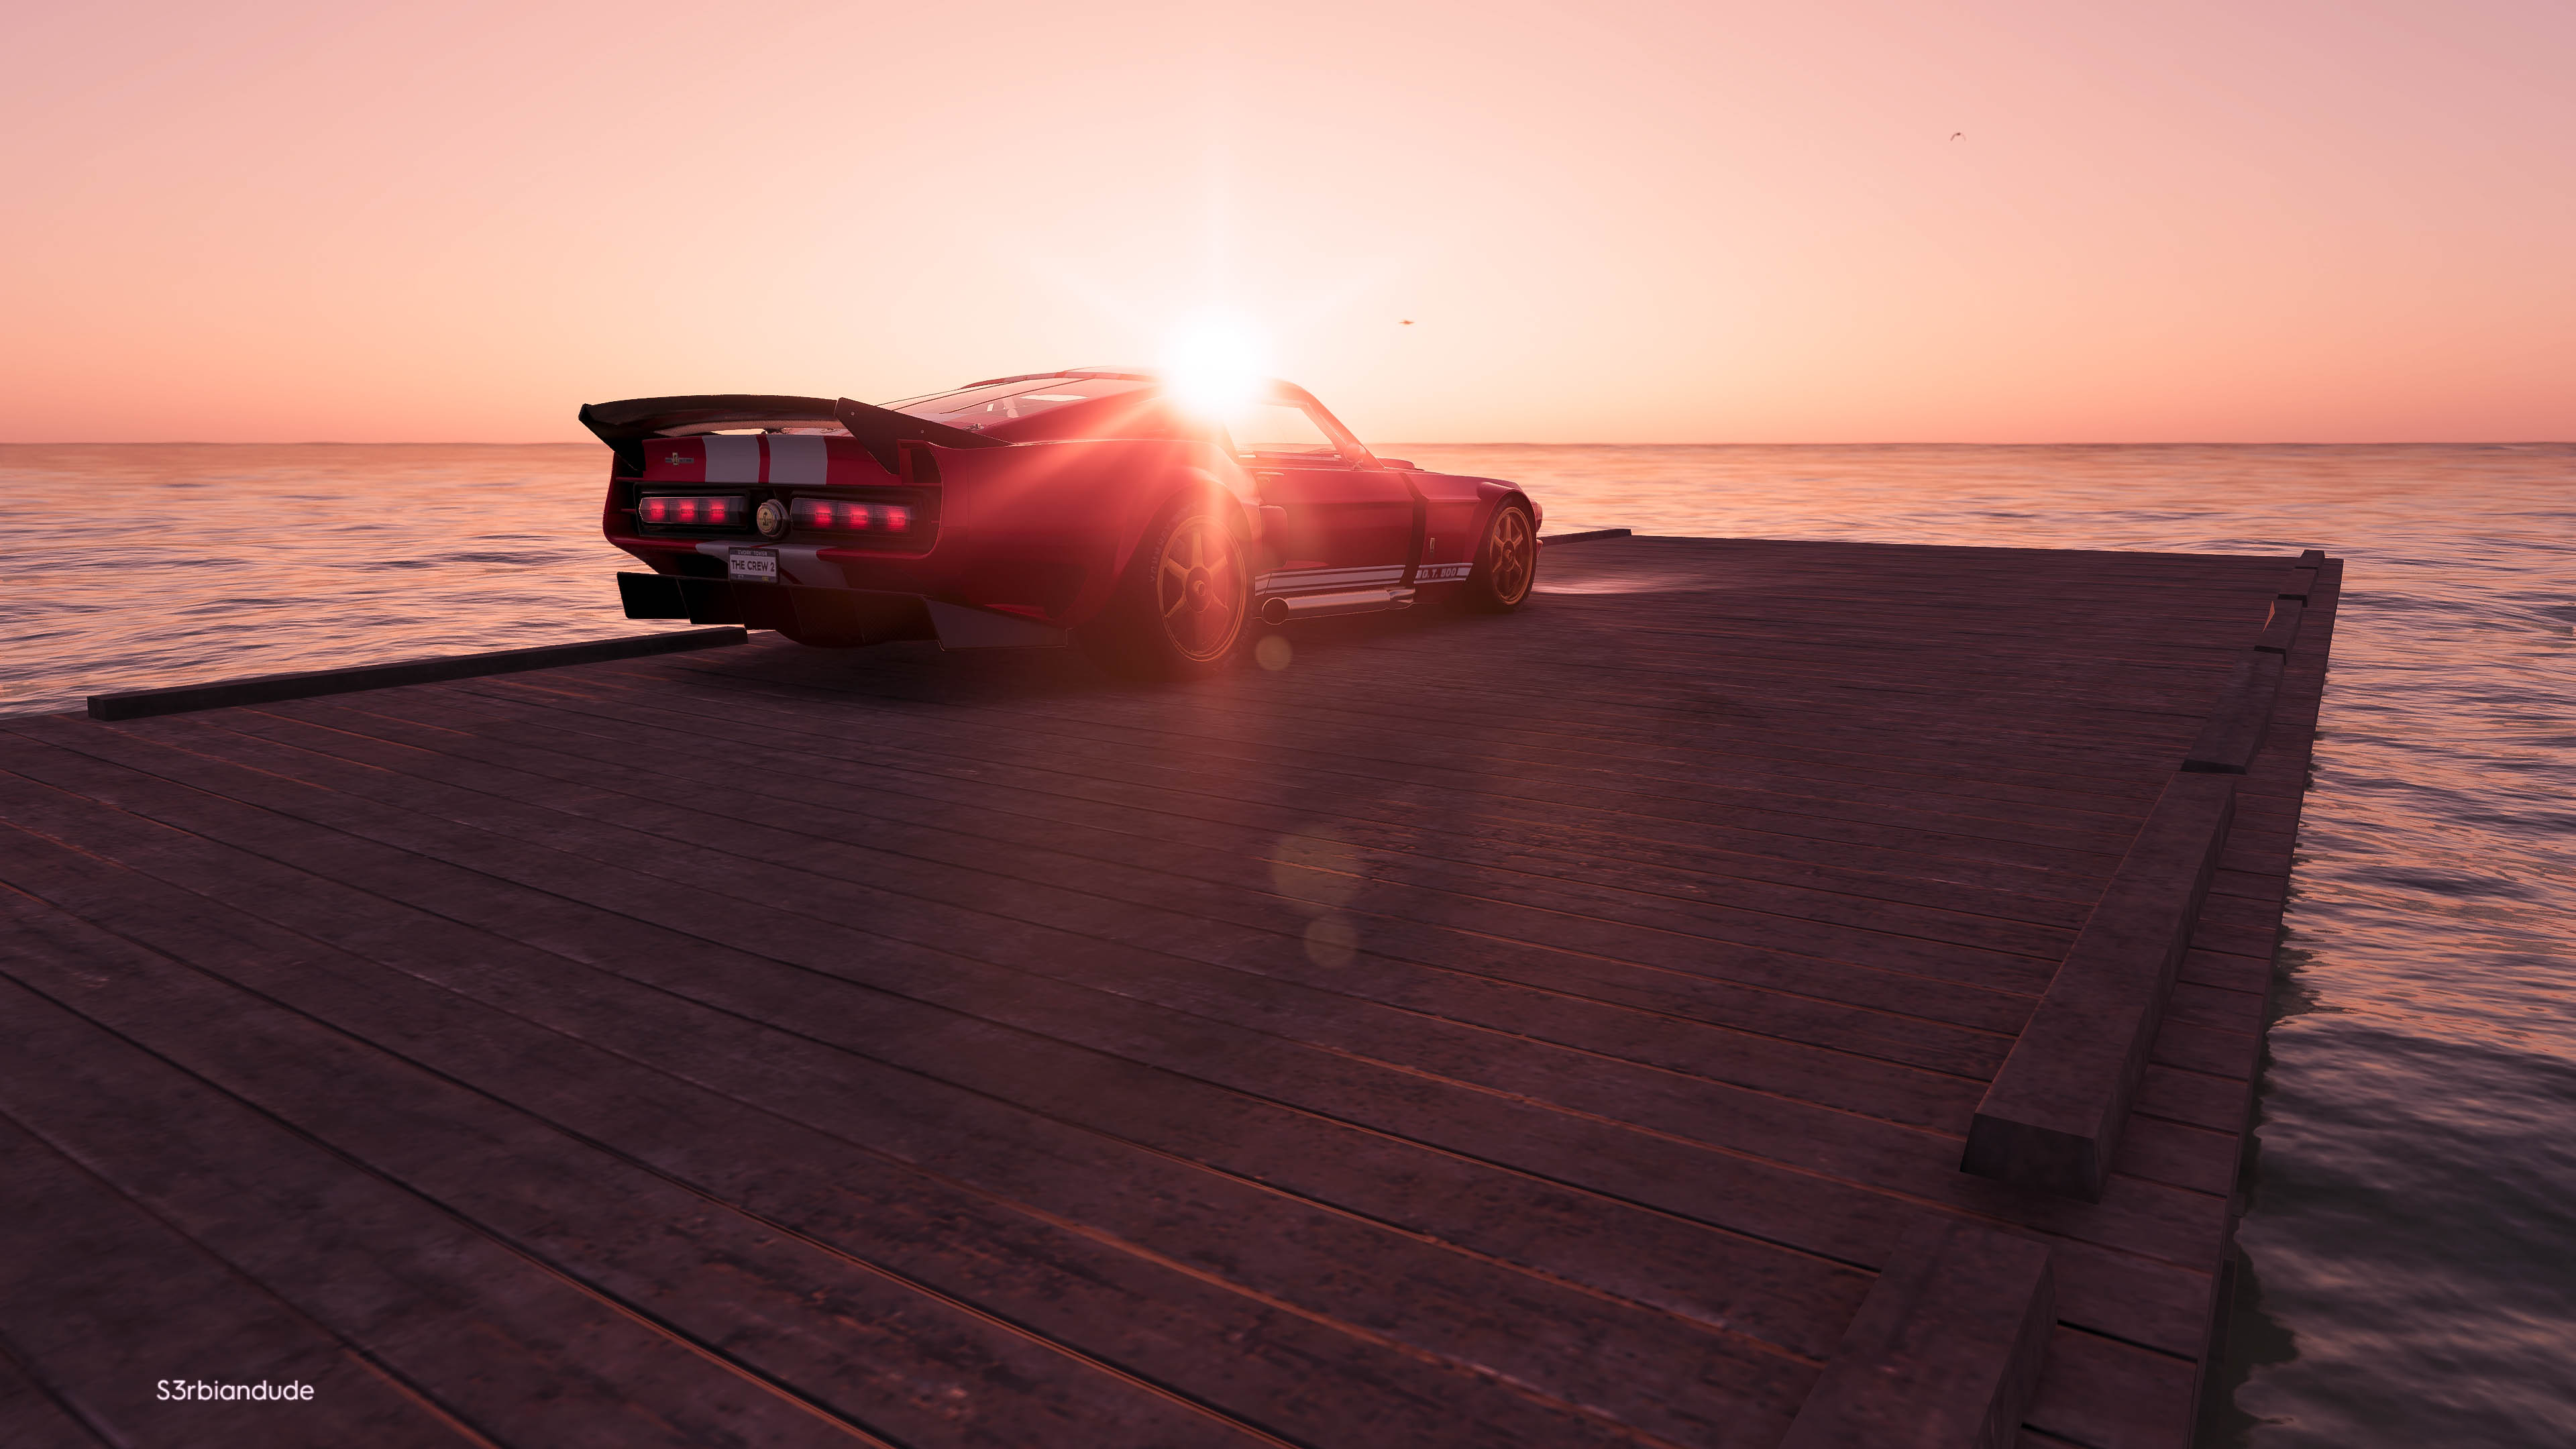 Video Game The Crew 2 HD Wallpaper | Background Image